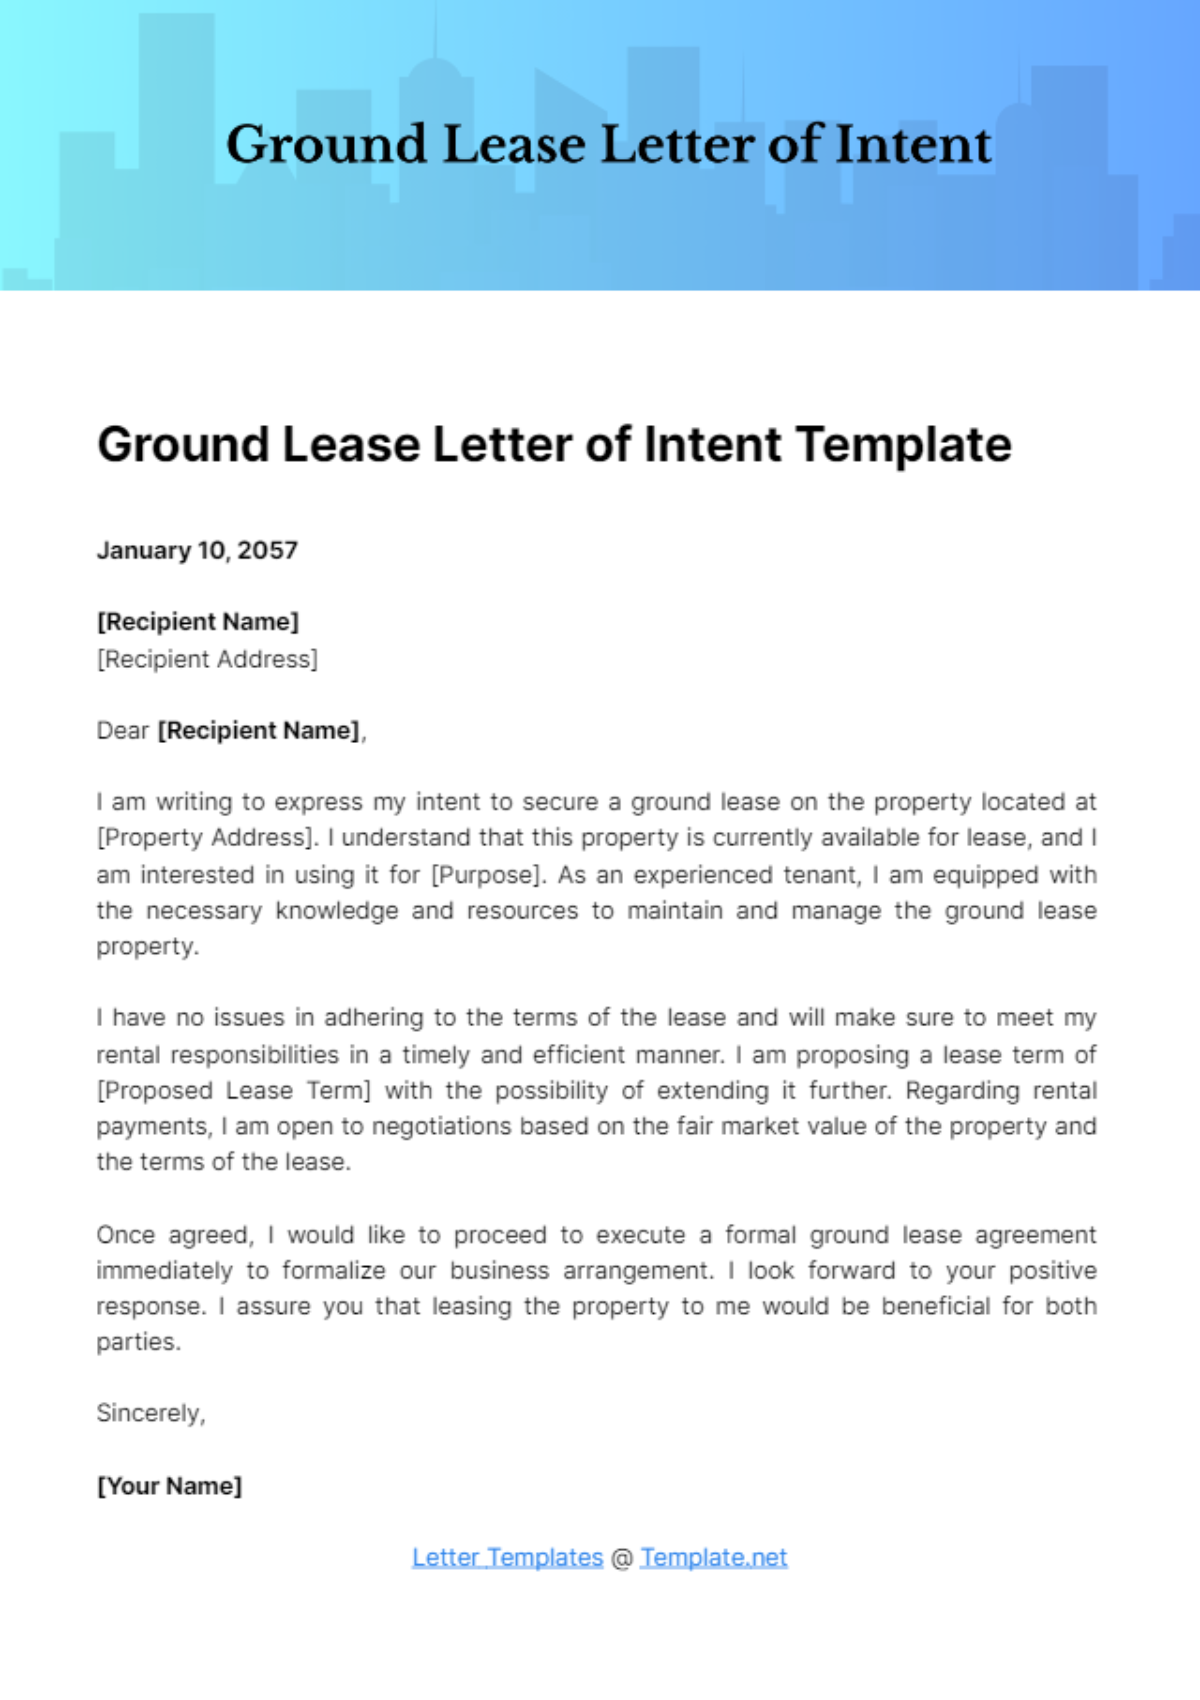 Ground Lease Letter of Intent Template